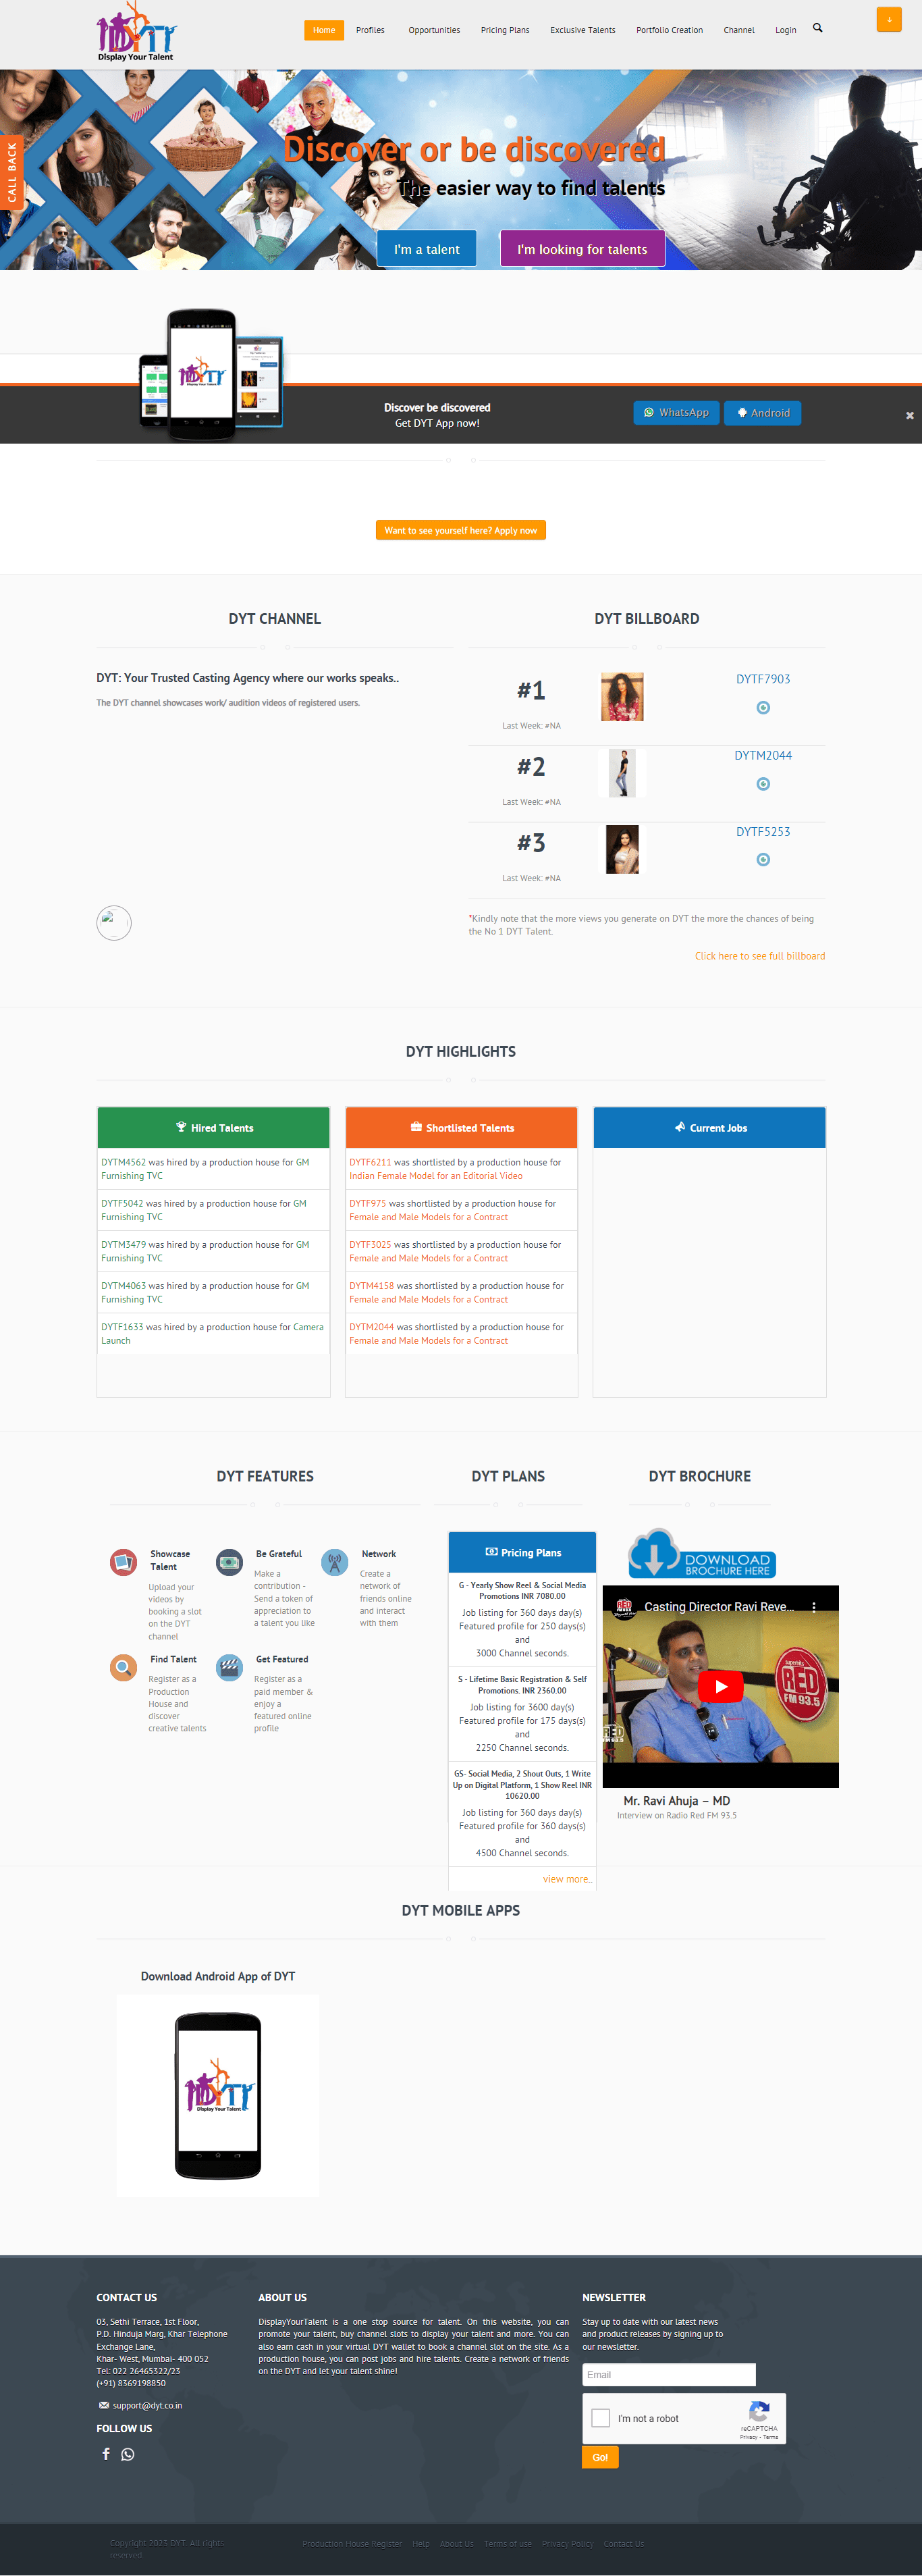 Display your talent web page screenshot